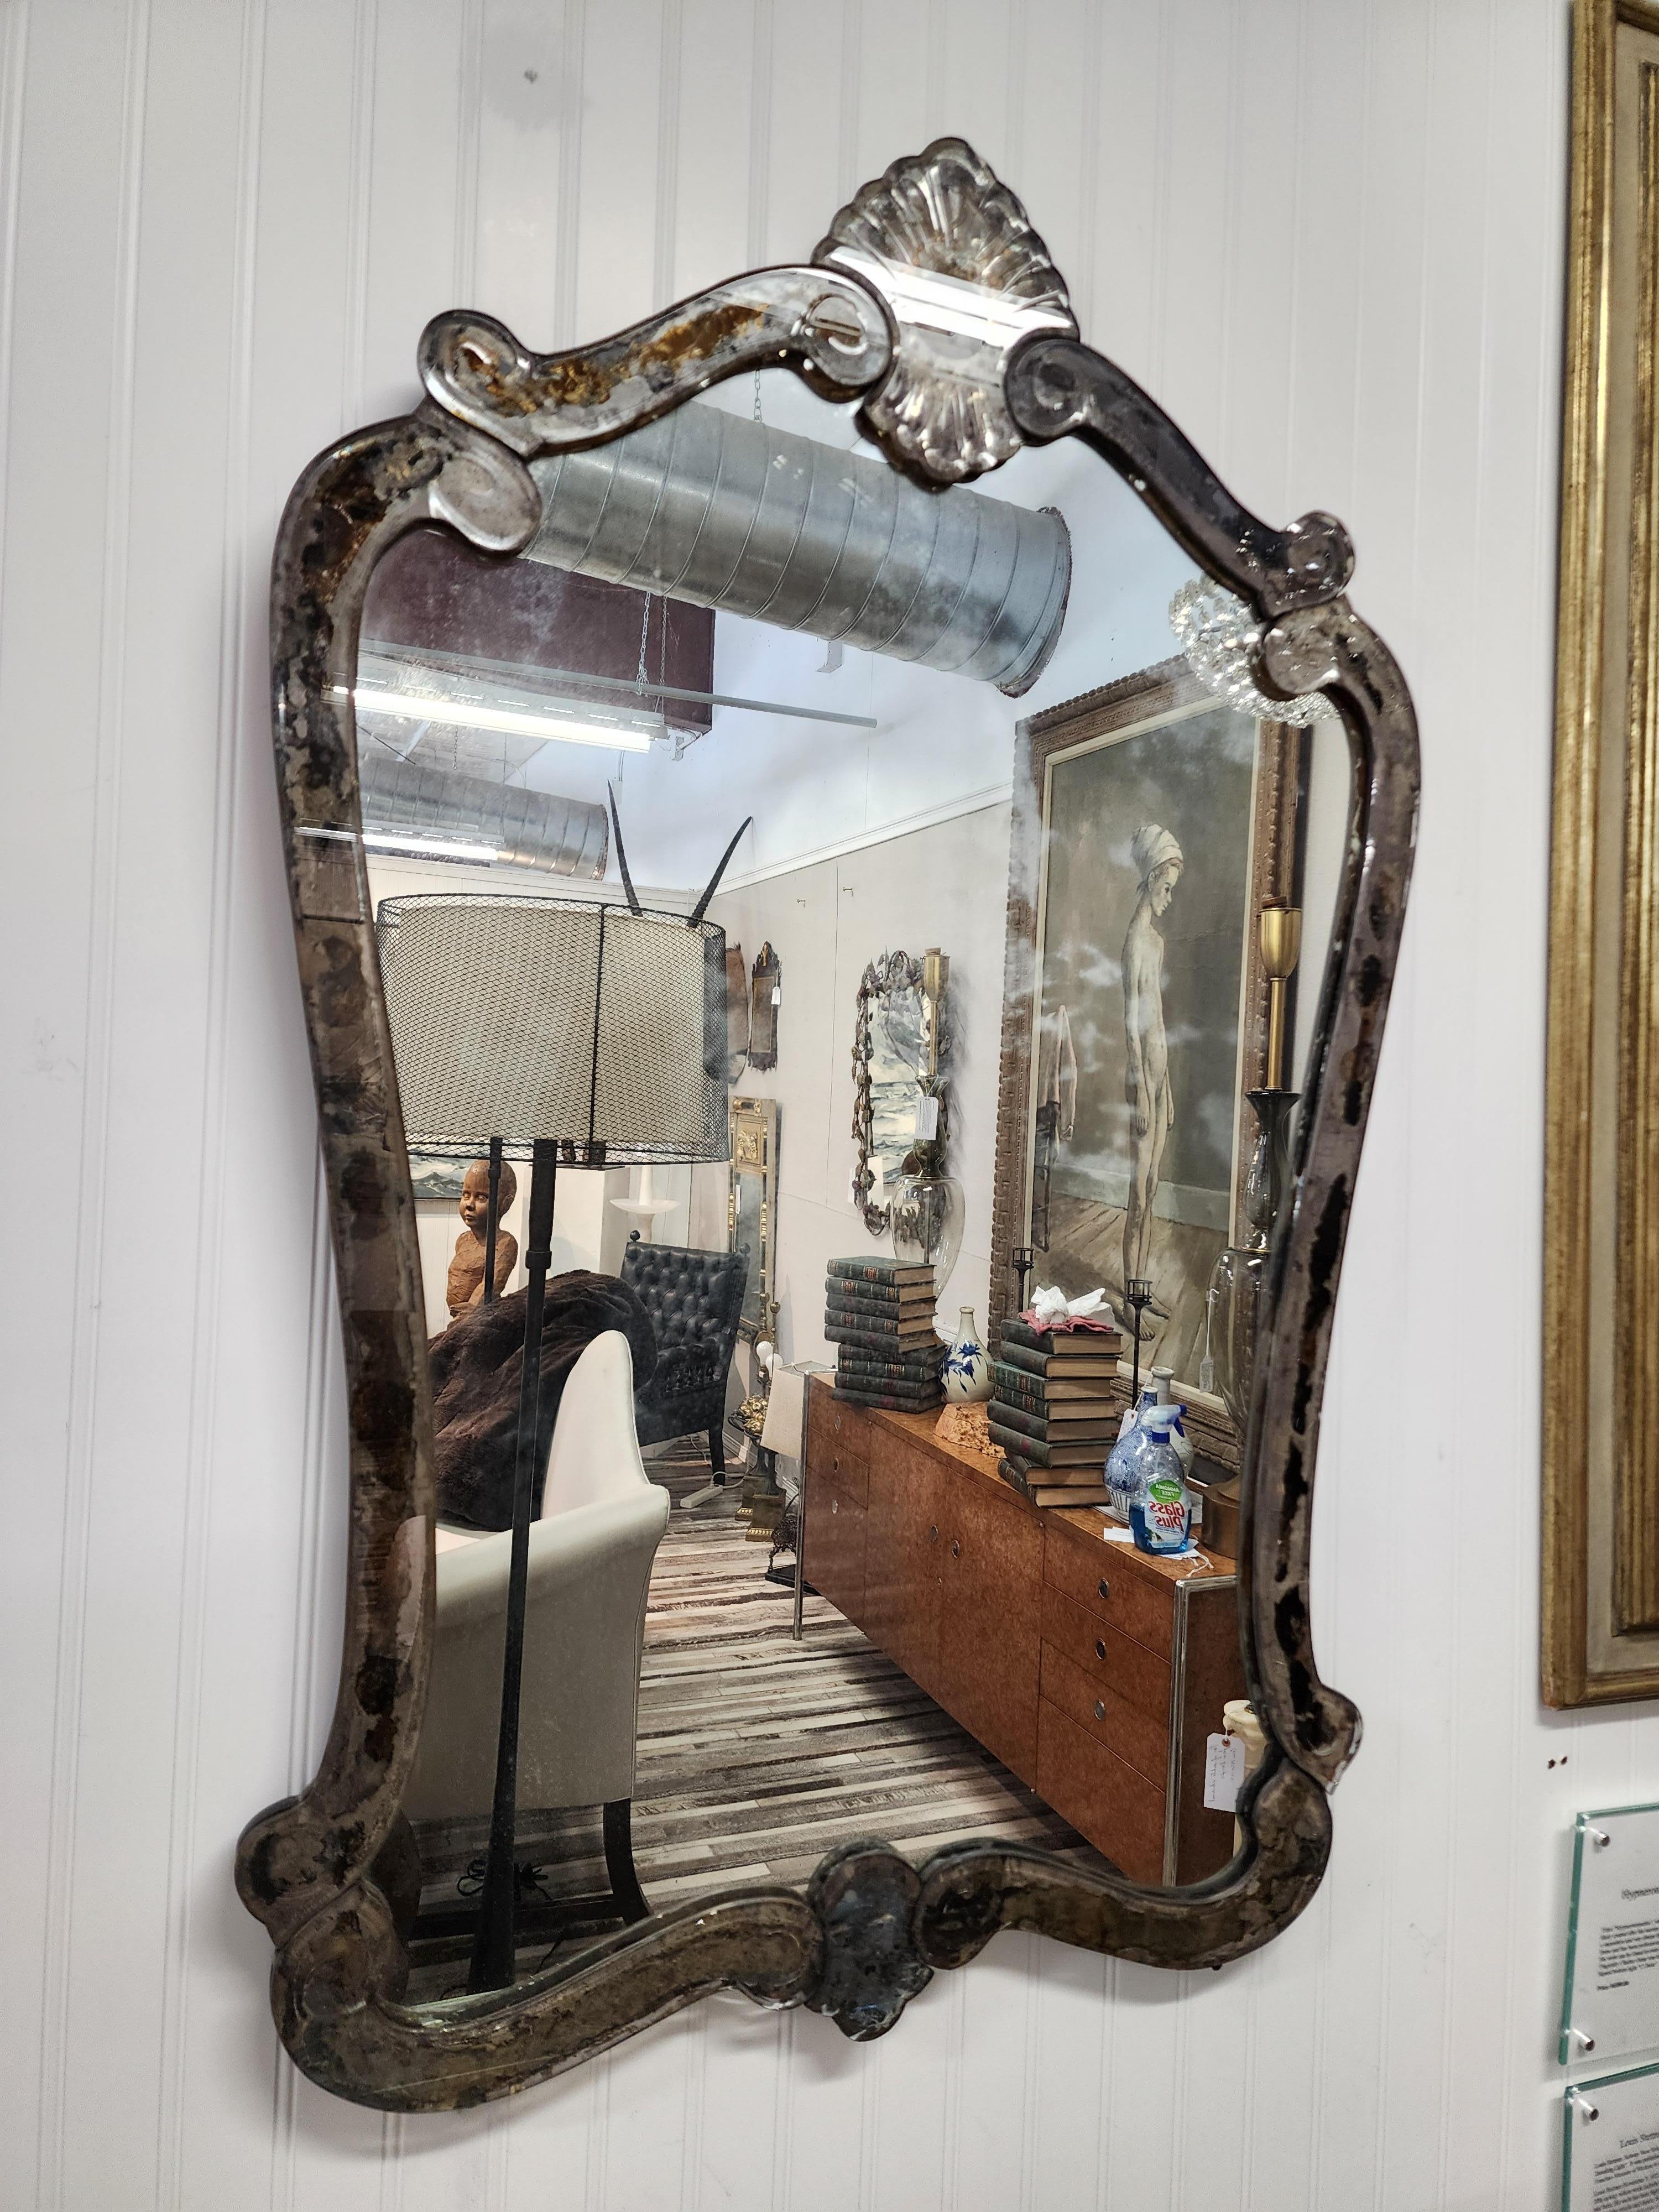 A very beautiful and reserved Venetian glass mirror. Simple and clean with some of the most beautifully patinized mirror glass I have seen.
Over time the silver to the frame of the mirror has turned into gorgeous warmth and weathered tones.